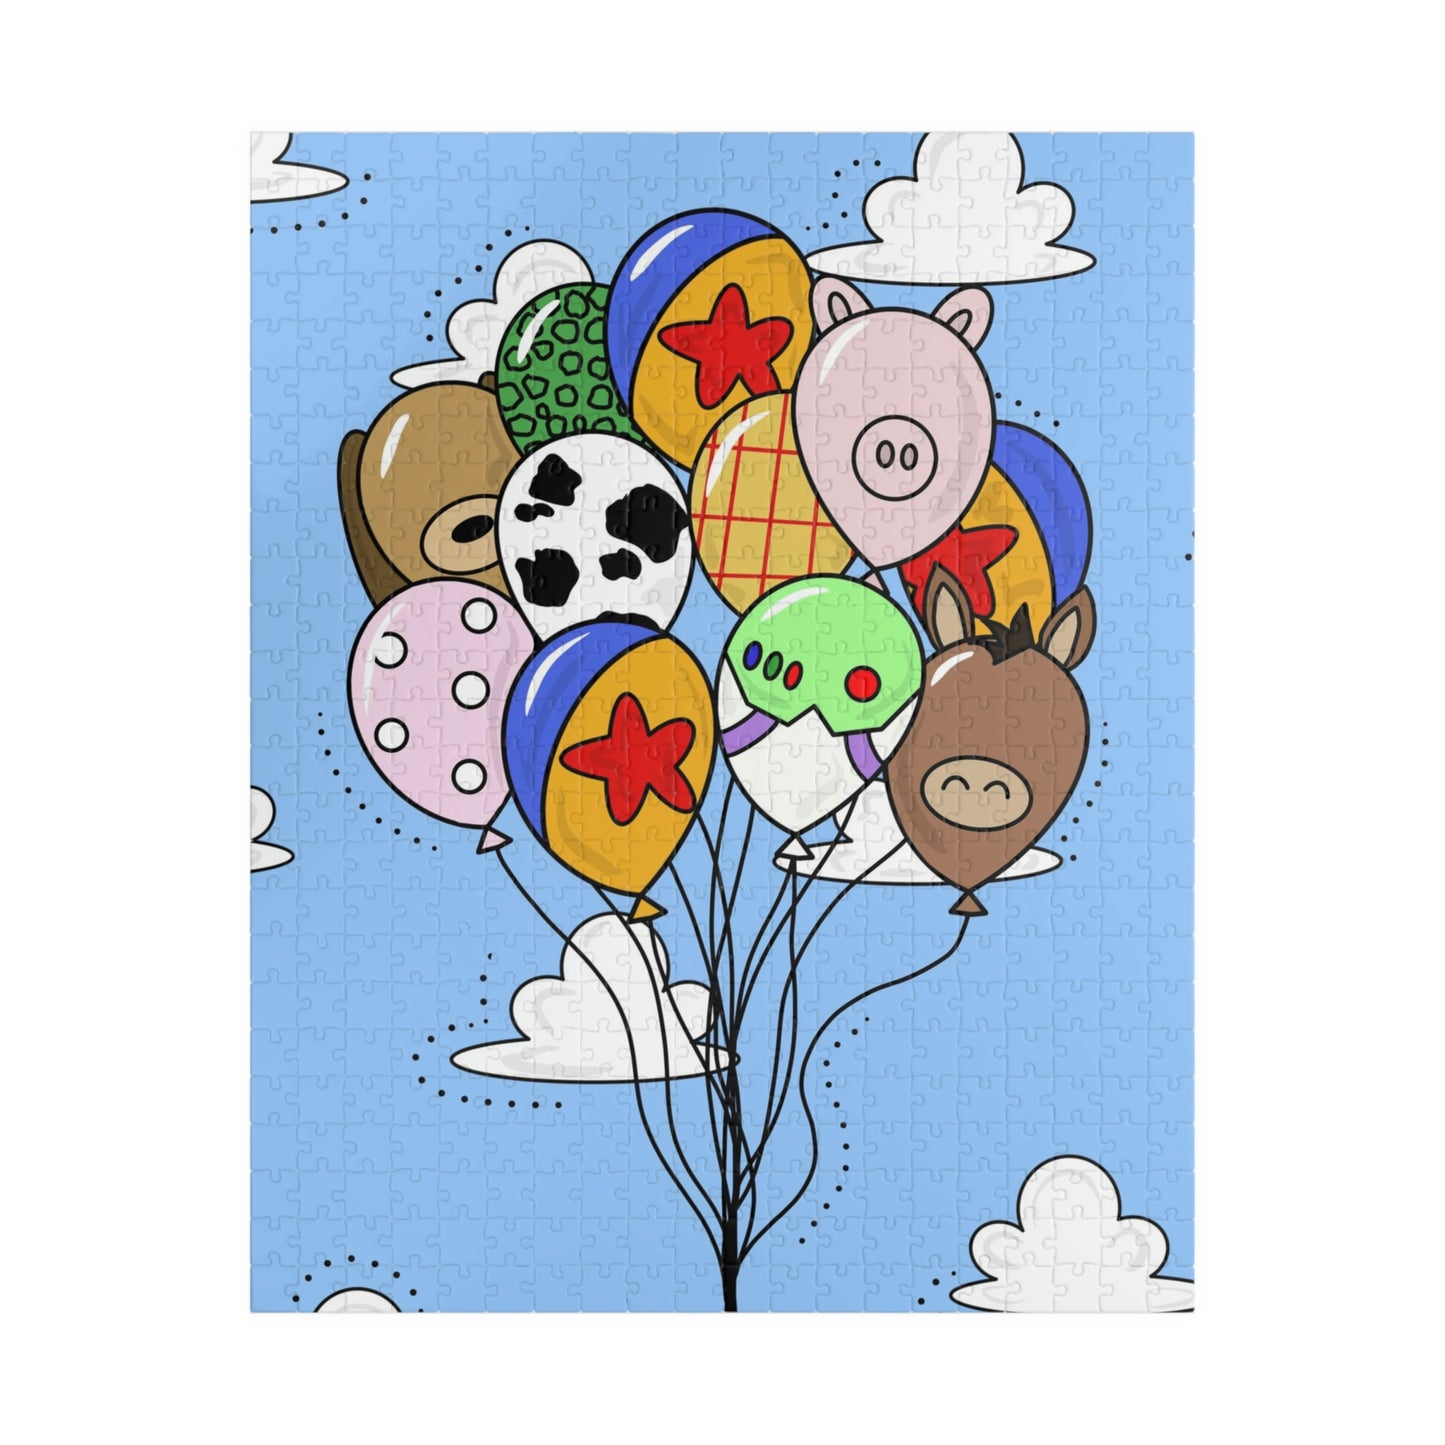 Toy Balloons Puzzle